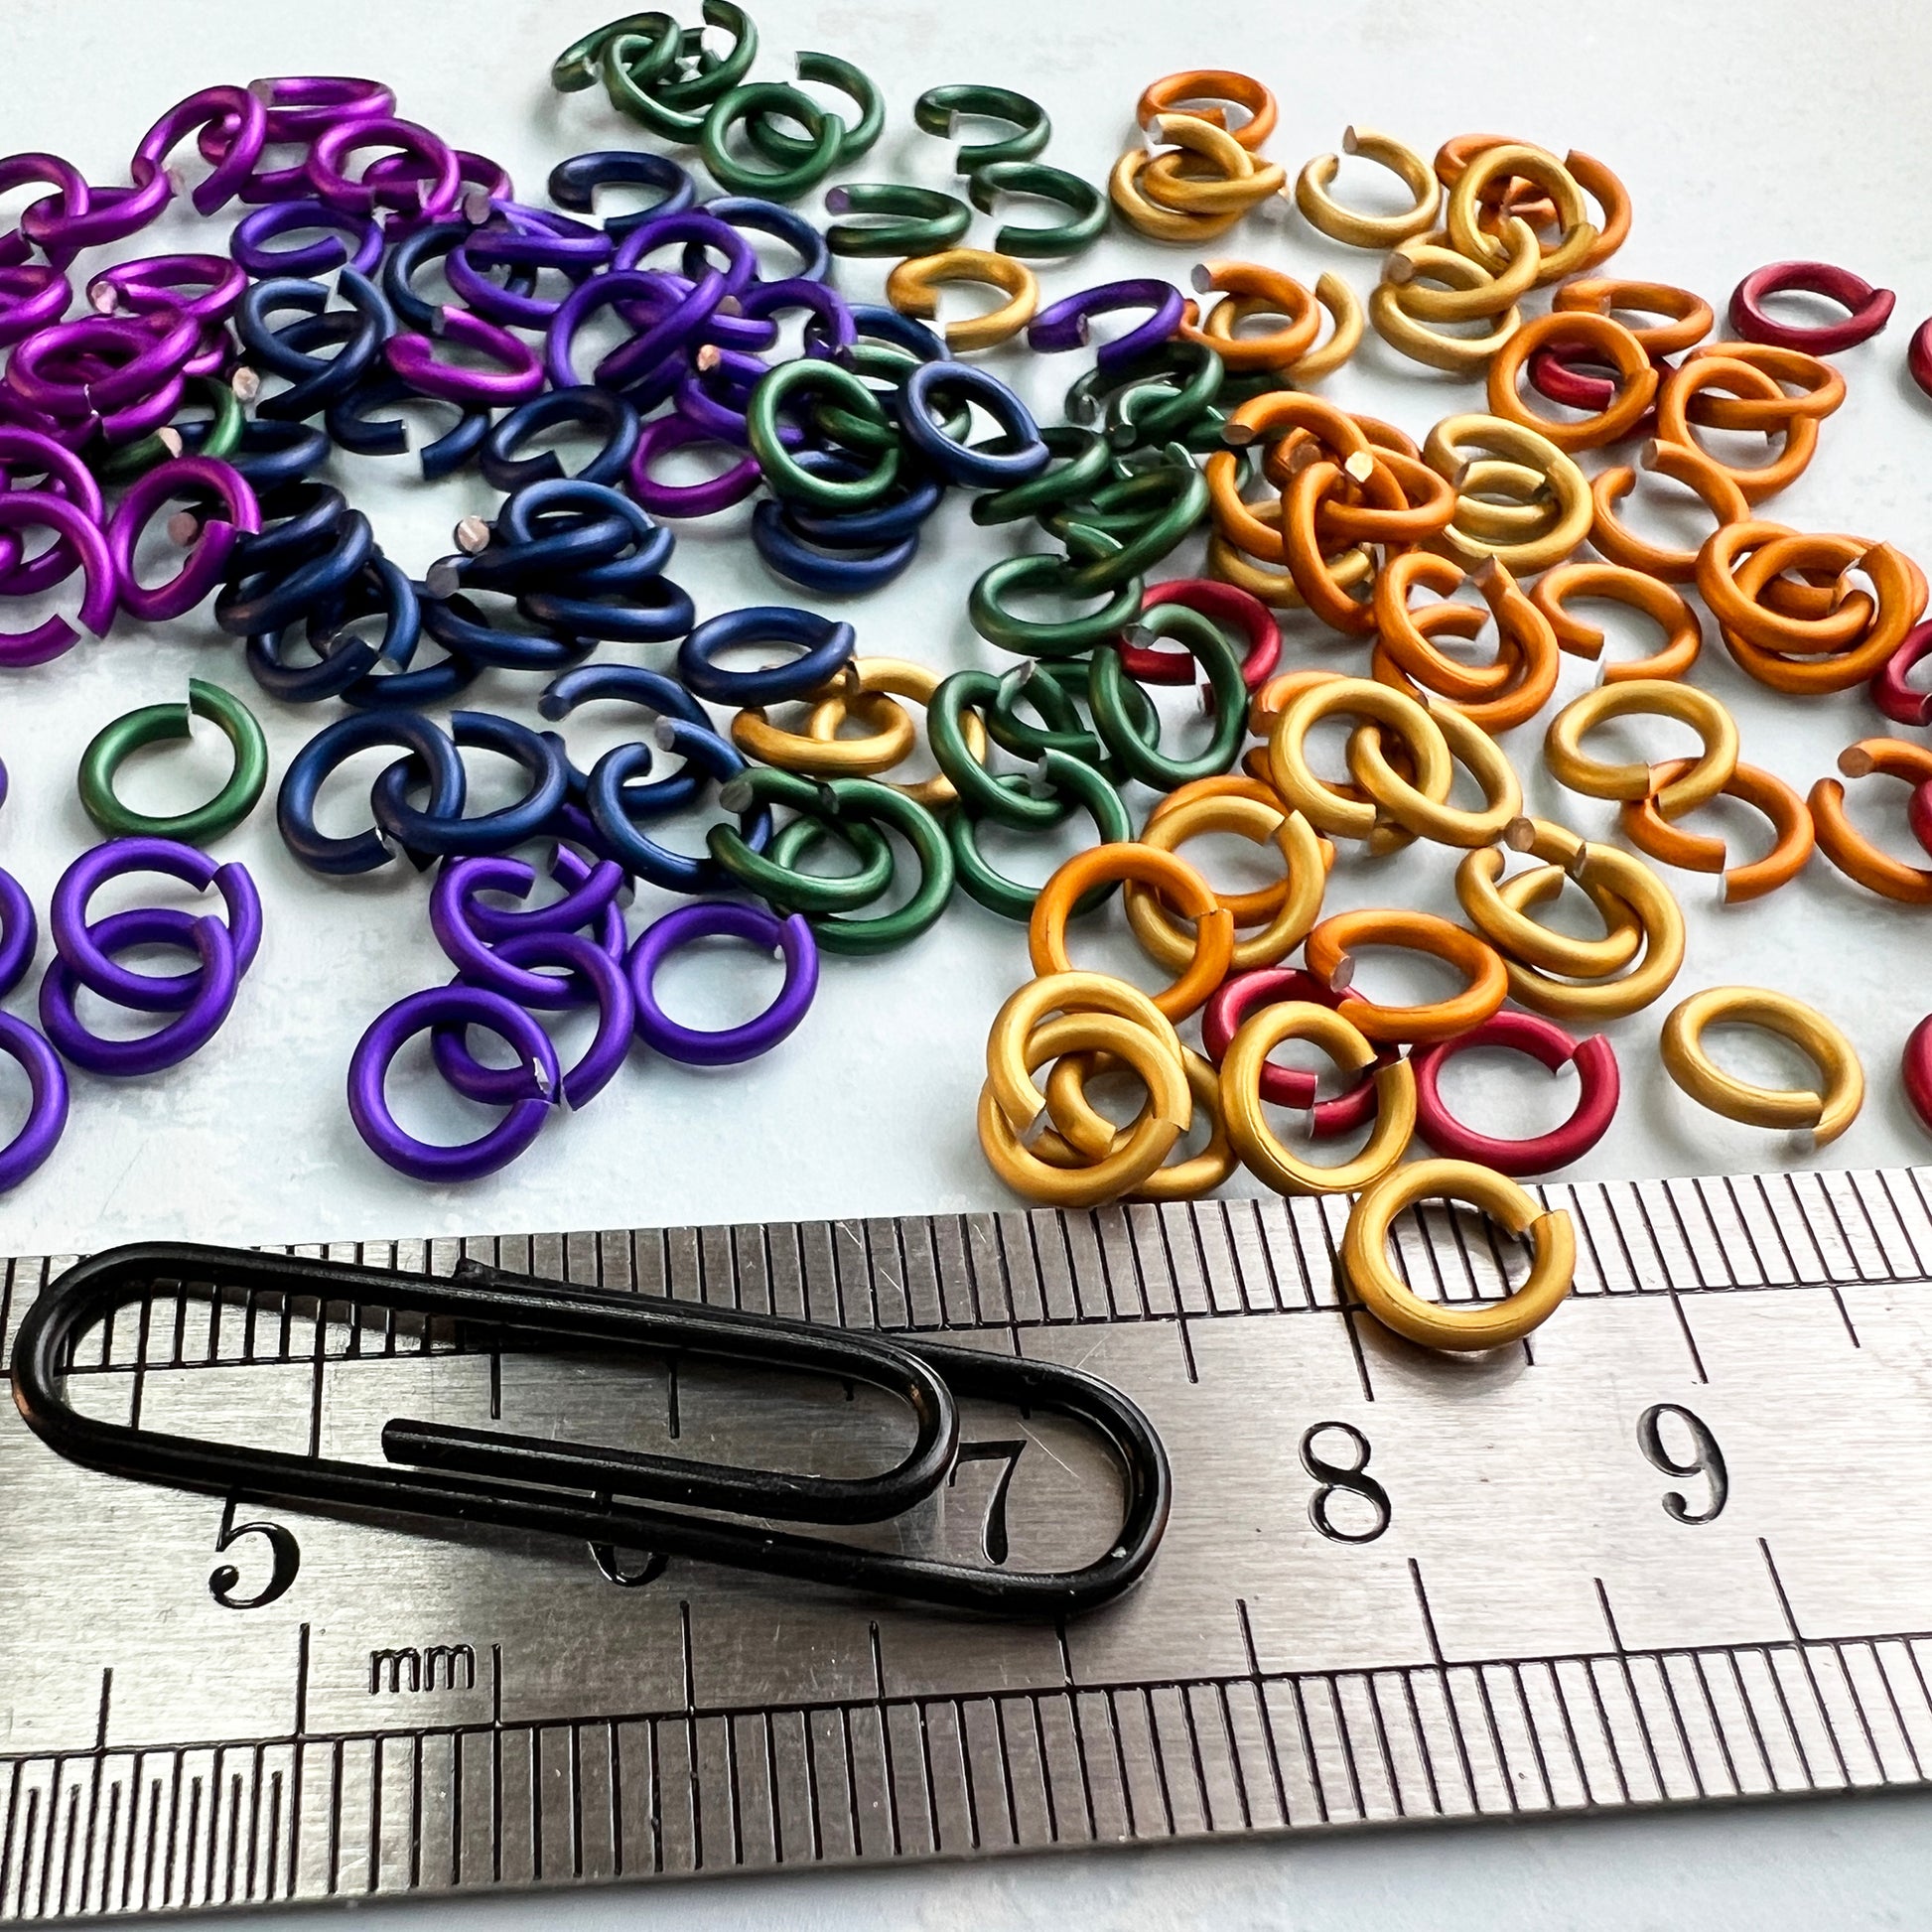 18g 5/32 SWG Jump Rings Rainbow Mixed - hand picked- choose matte or shiny